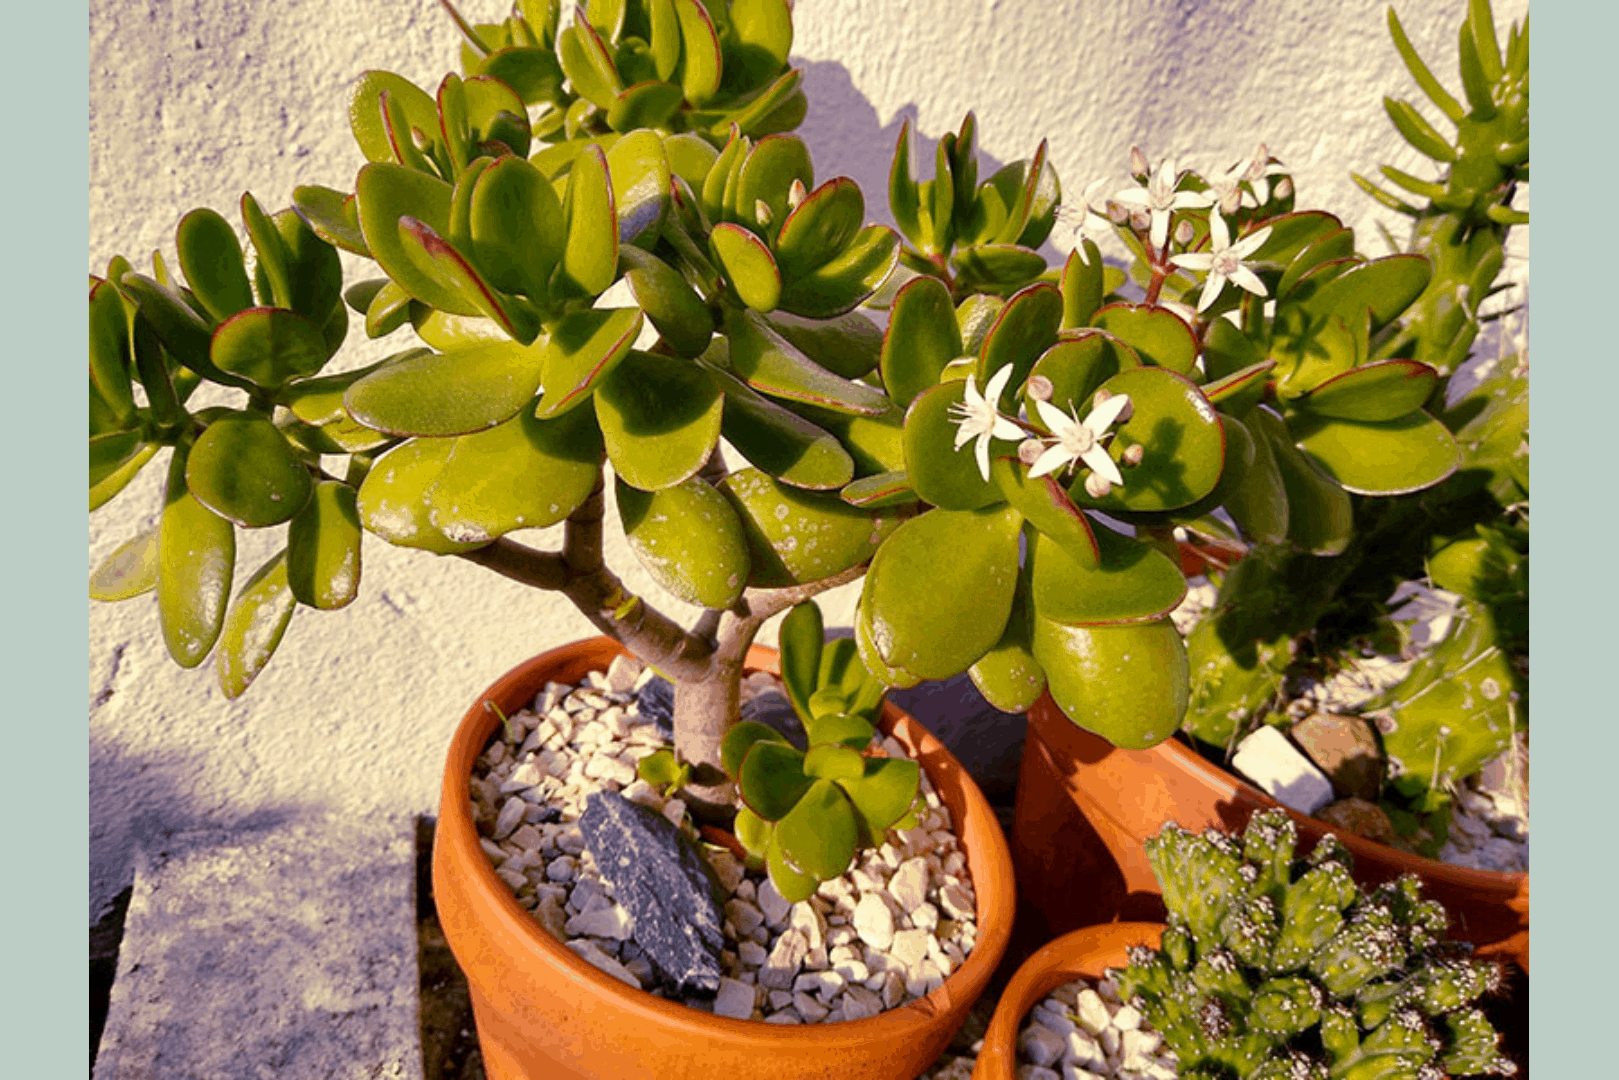 How to care for a jade plant outside? 4